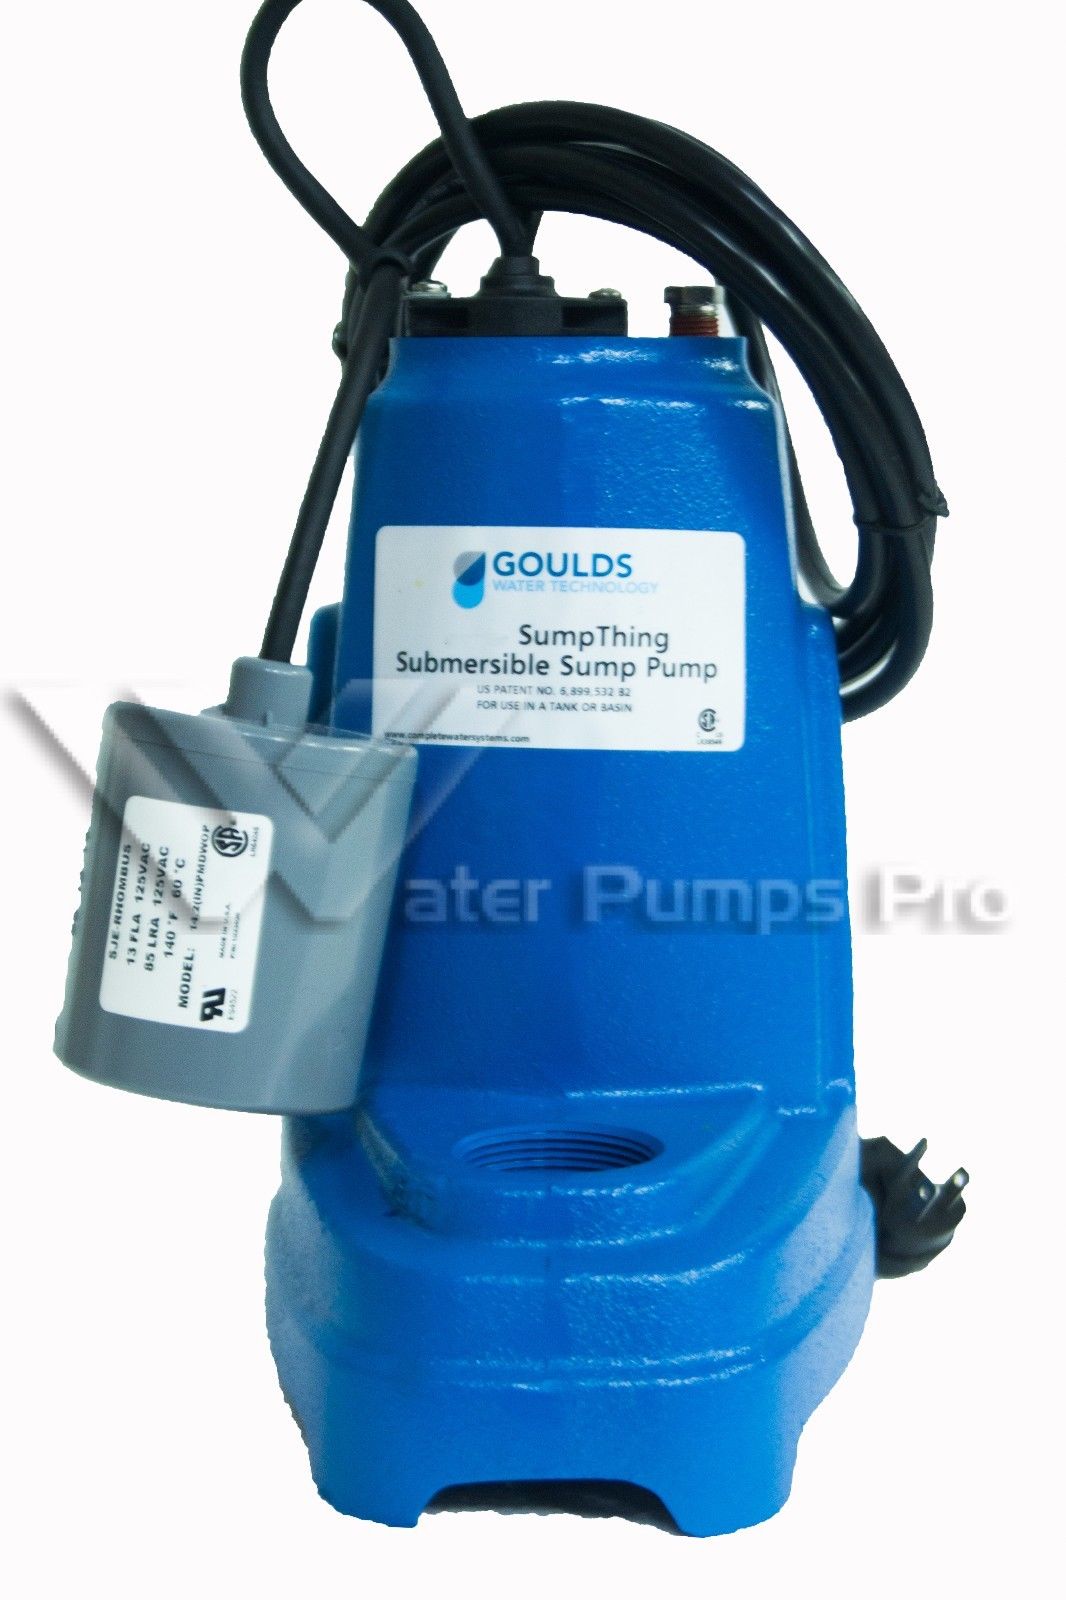 Goulds ST31A1 Submersible Sump Pump 1/3HP 115V "Sump Thing"